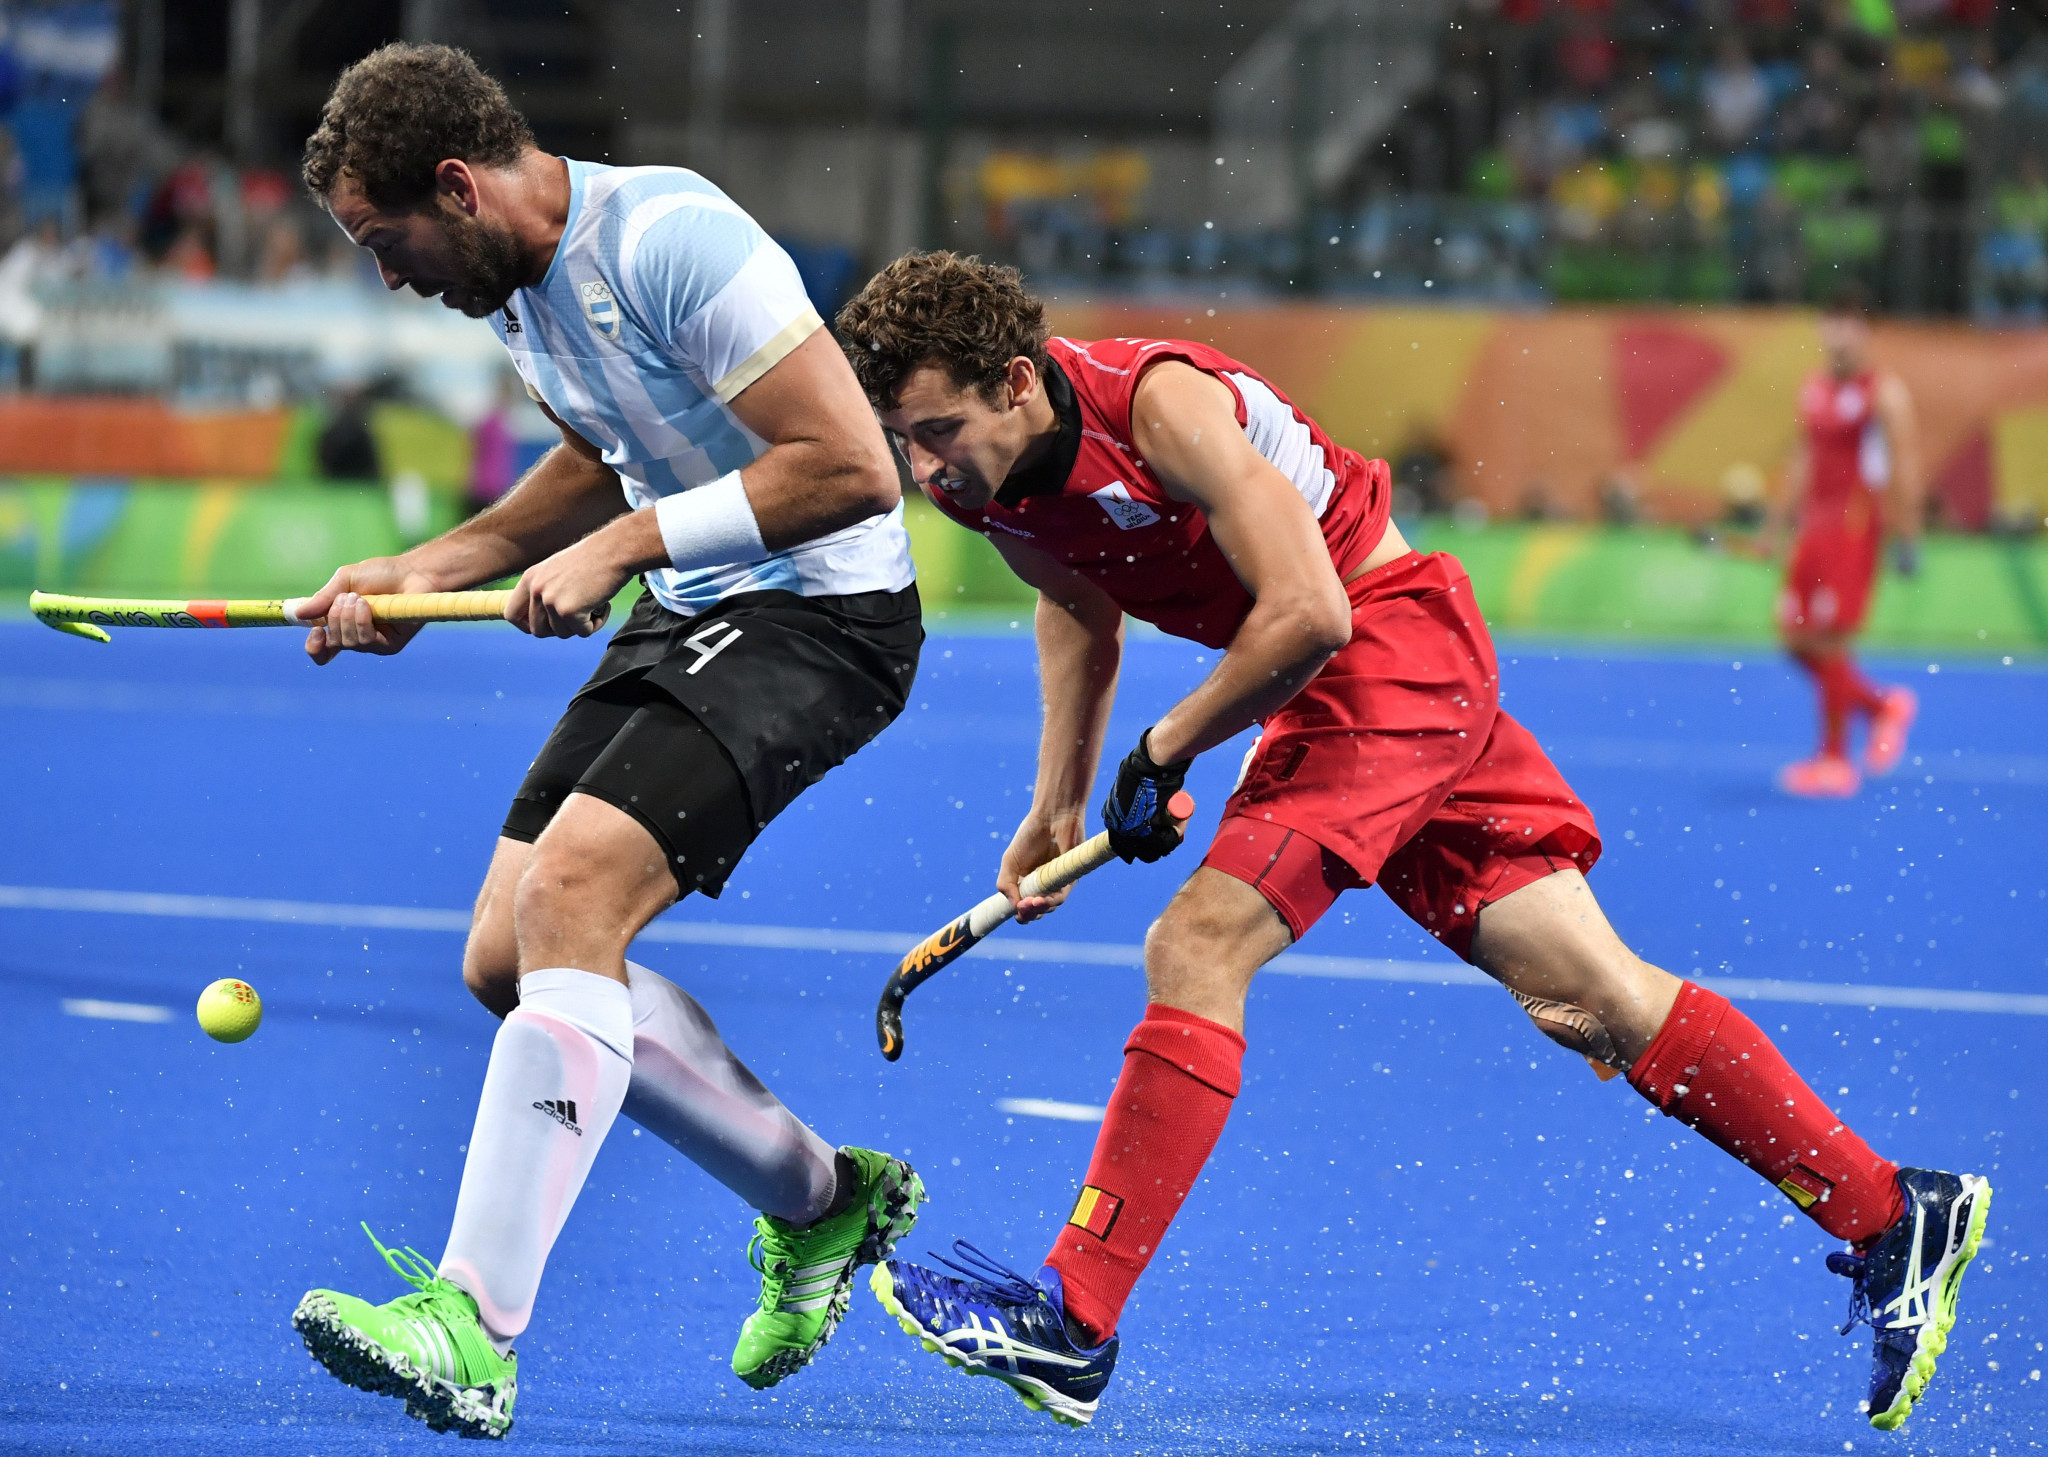 Rio 2016 rematch to headline group stages at Men's Hockey World League Final in India